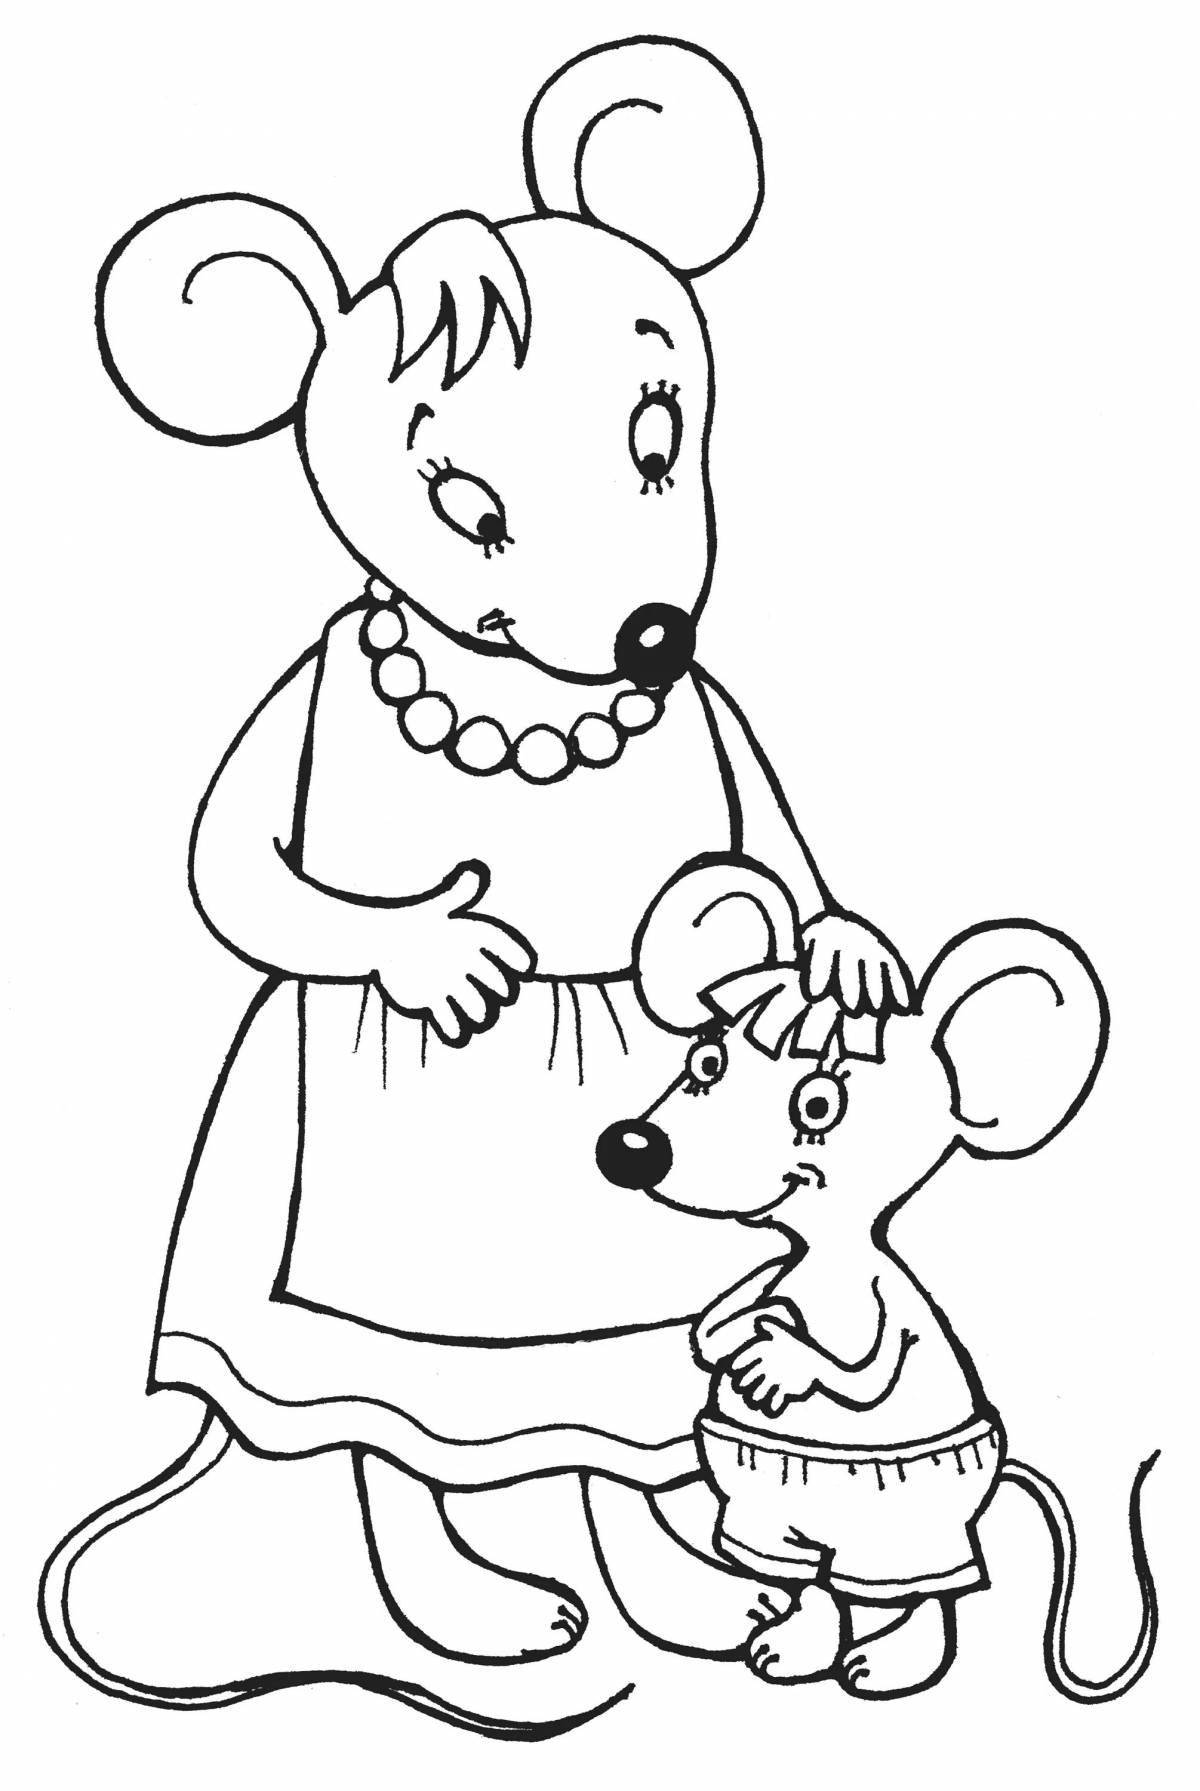 A fascinating coloring book about a silly little mouse